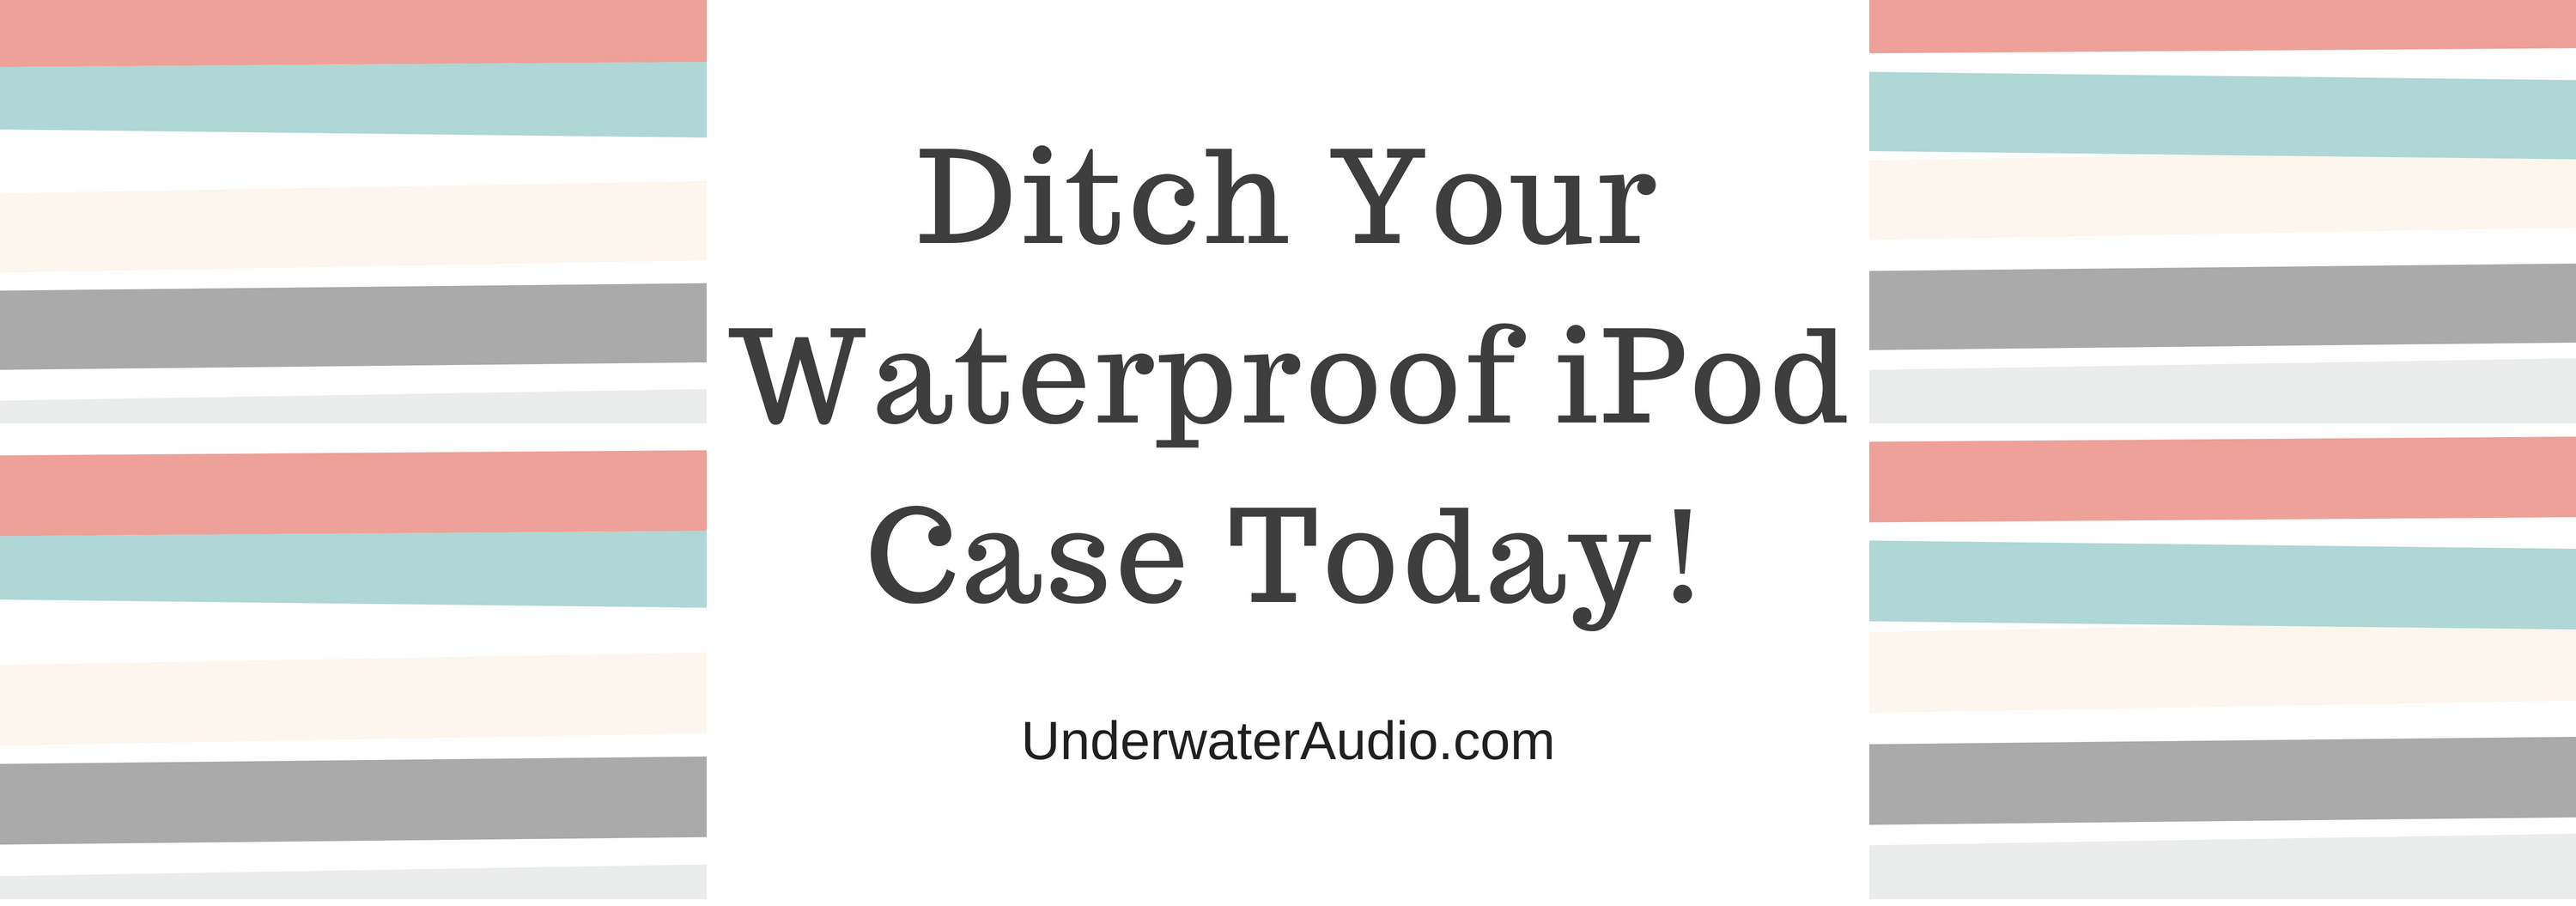 Ditch Your Waterproof iPod Case Today!